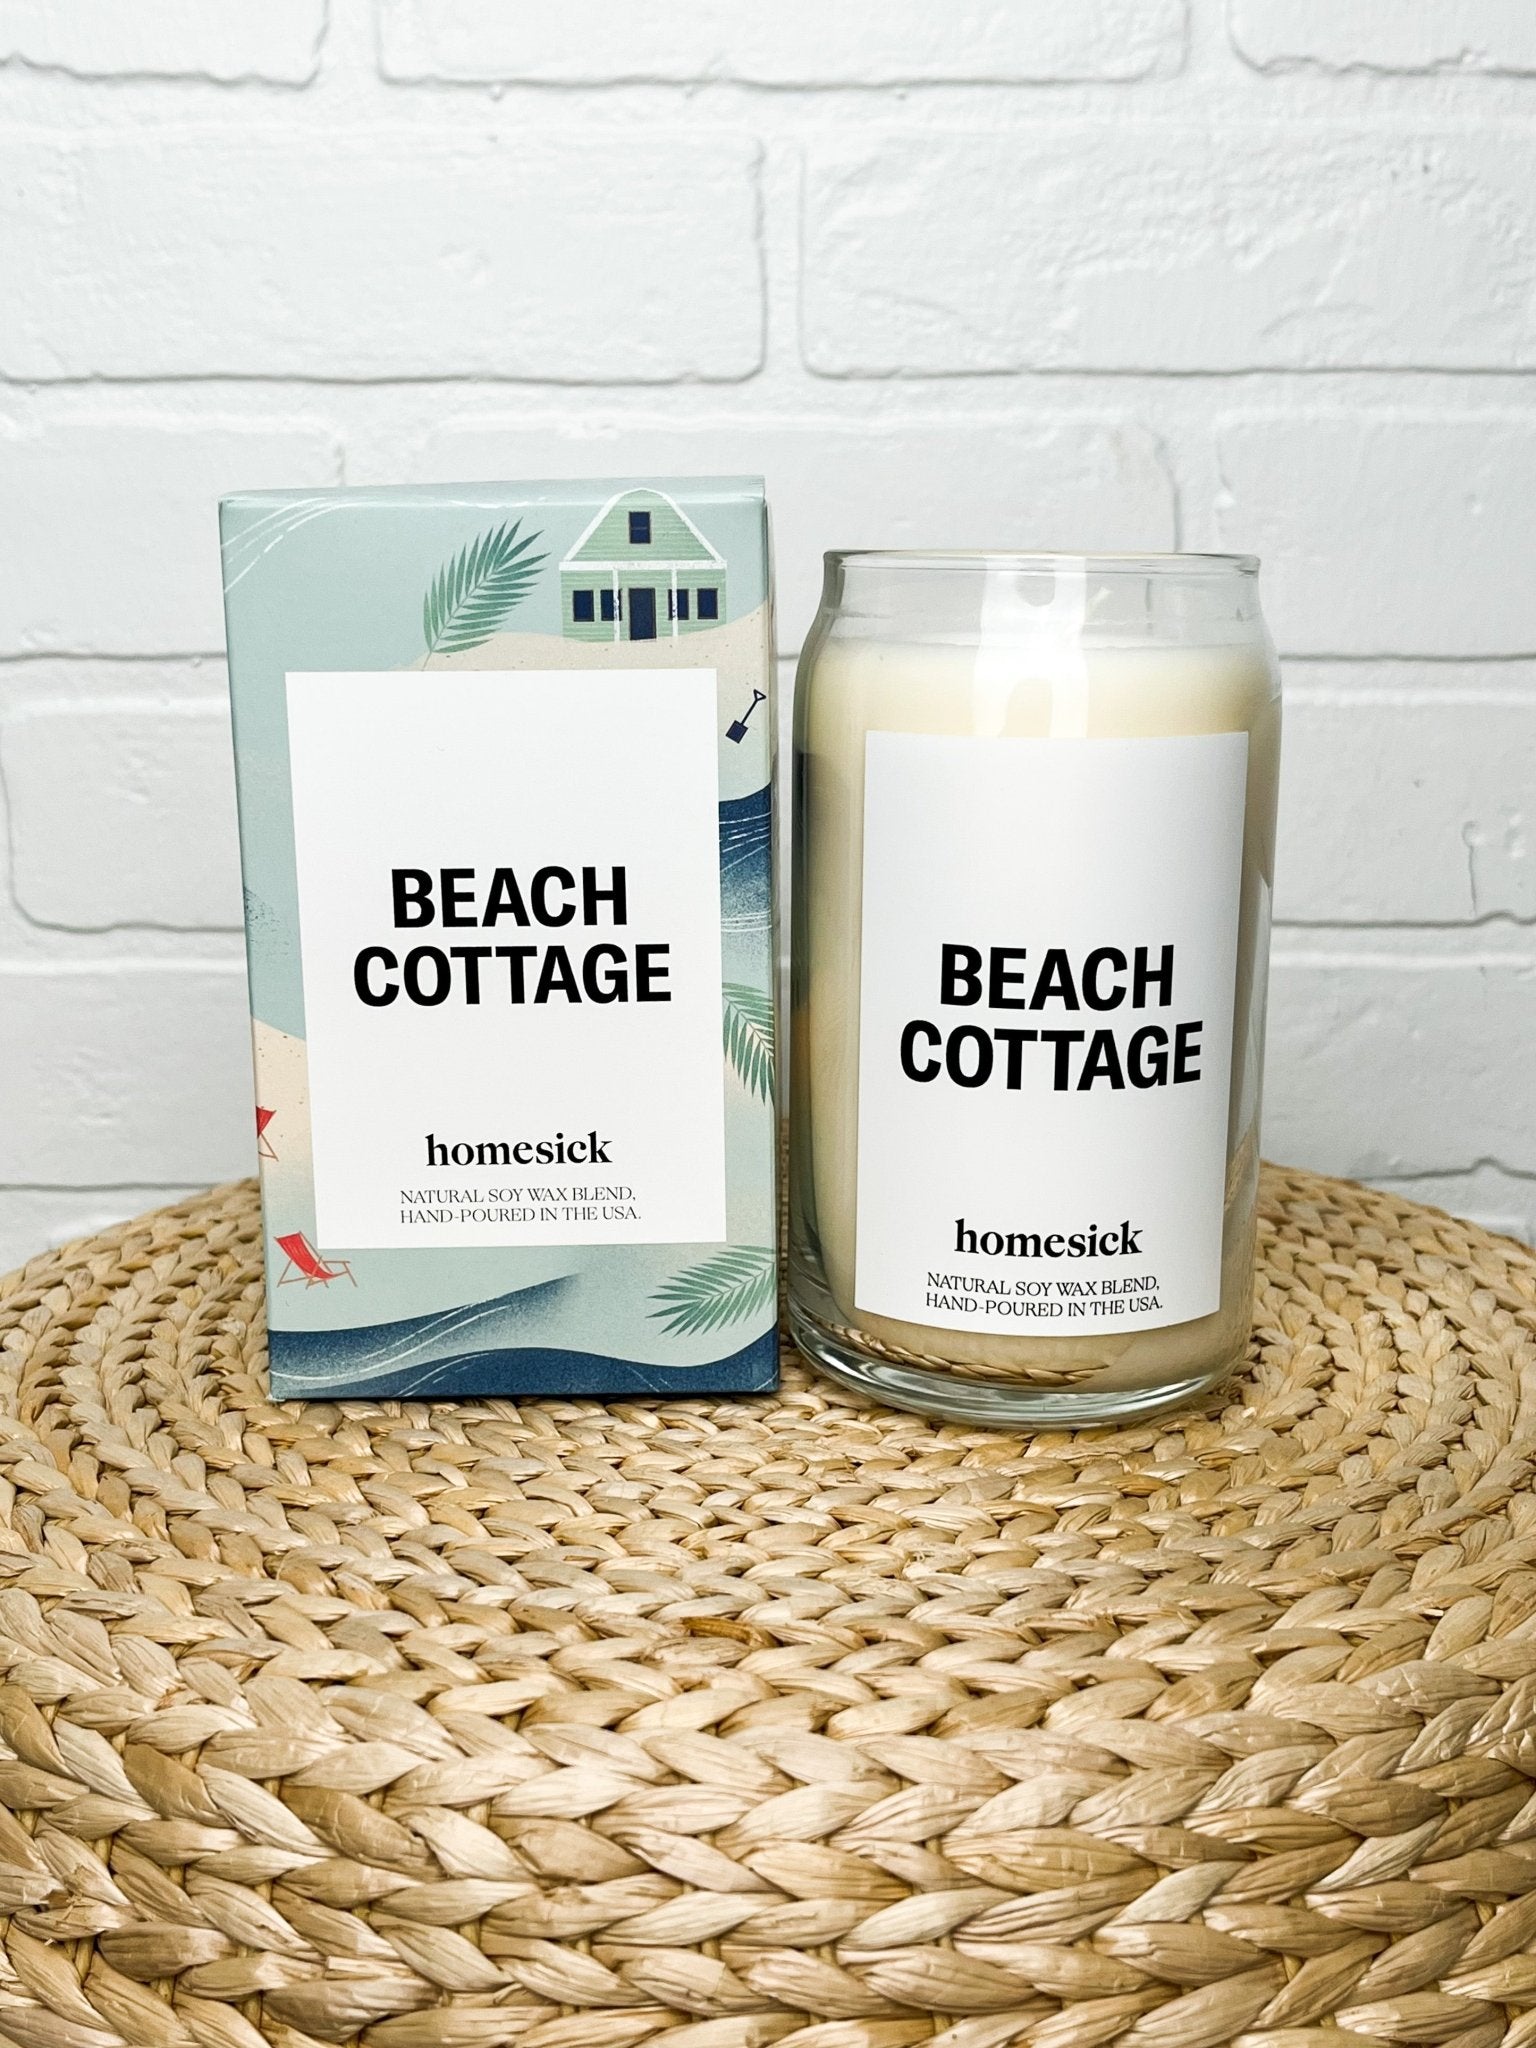 Homesick Beach Cottage candle - Trendy Candles at Lush Fashion Lounge Boutique in Oklahoma City